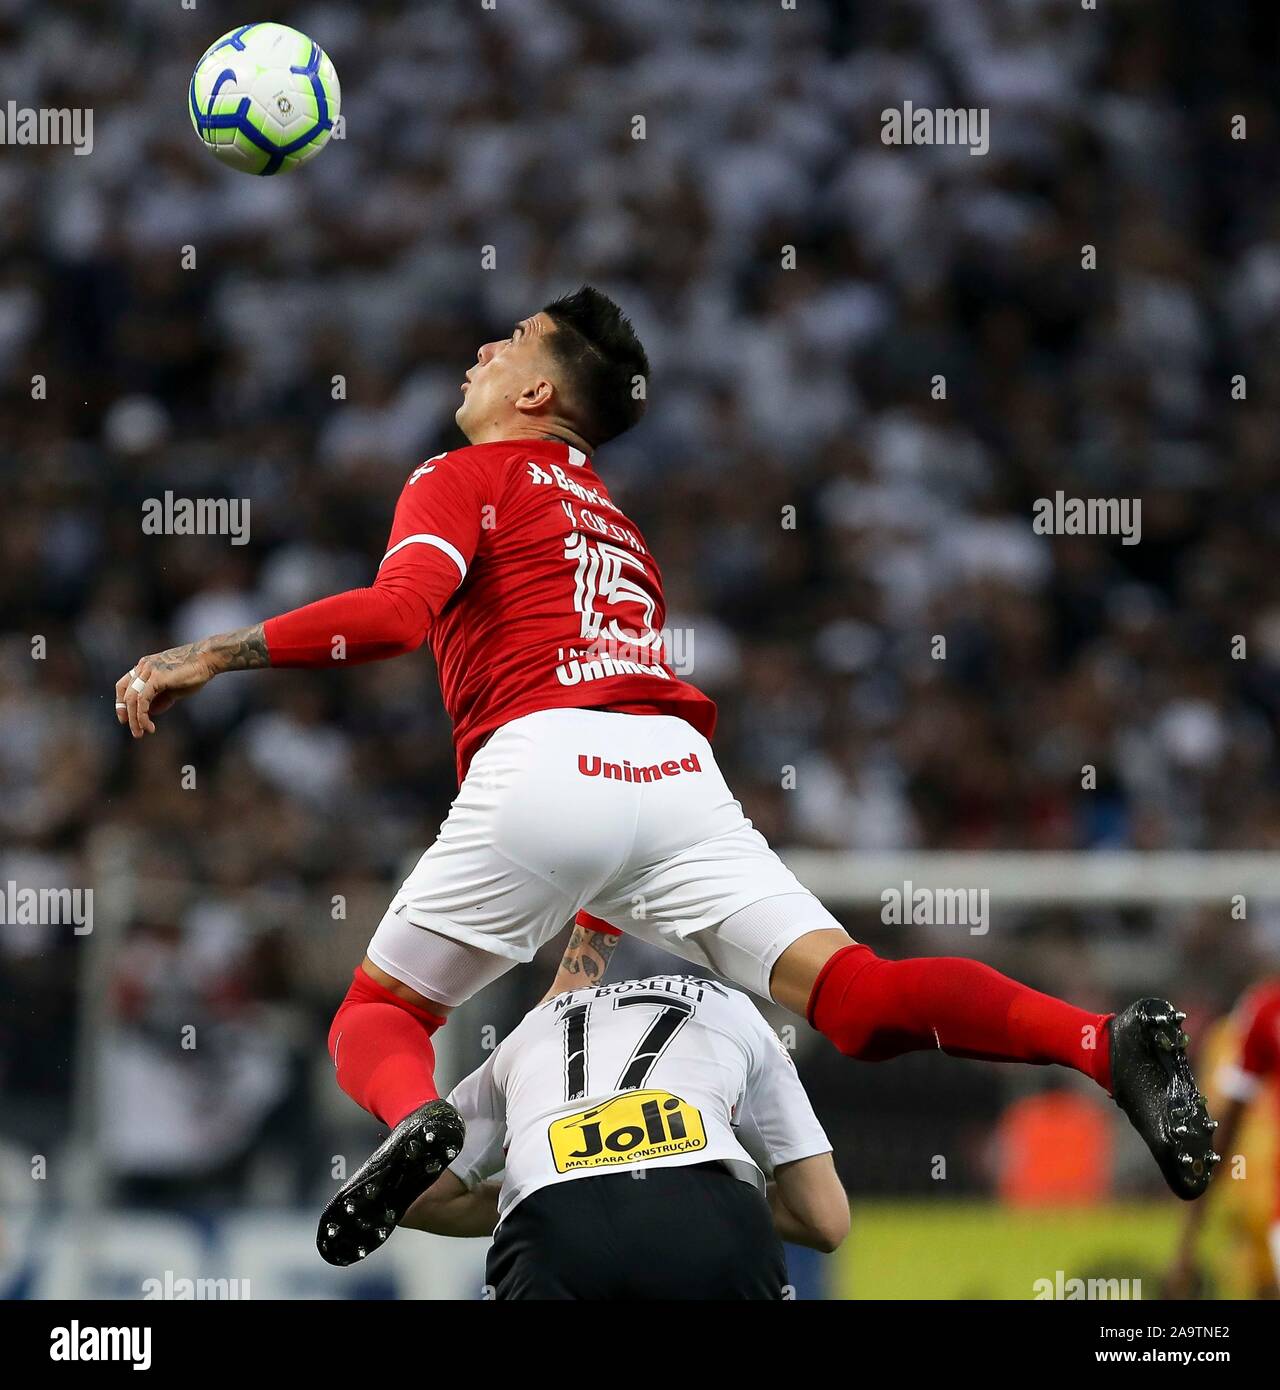 Sao Paulo Sp 17 11 2019 Corinthians X Internacional Victor Cuesta Shares With Boselli During The Match Between Corinthians And Internacional Held At The Corinthians Arena In Sao Paulo Sp The Match